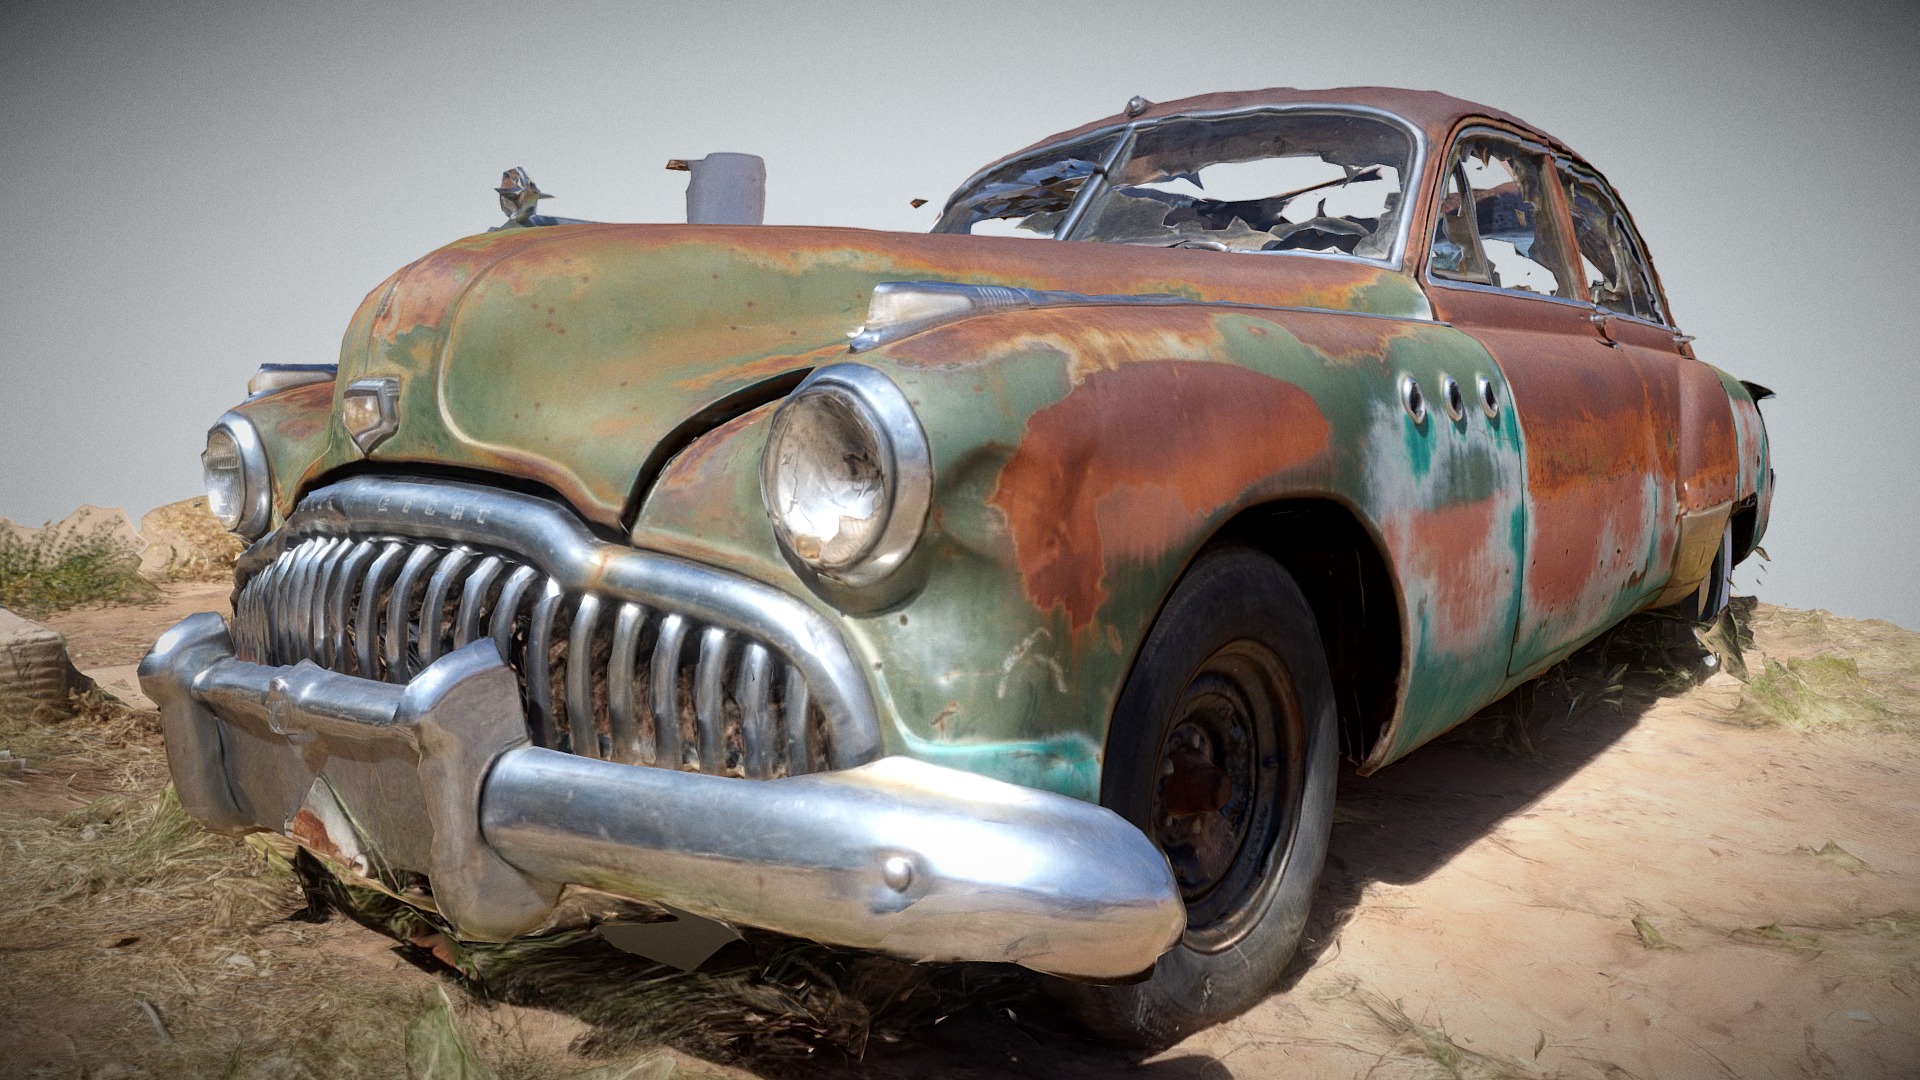 3D model 49 Buick - This is a 3D model of the 49 Buick. The 3D model is about an old rusted car.